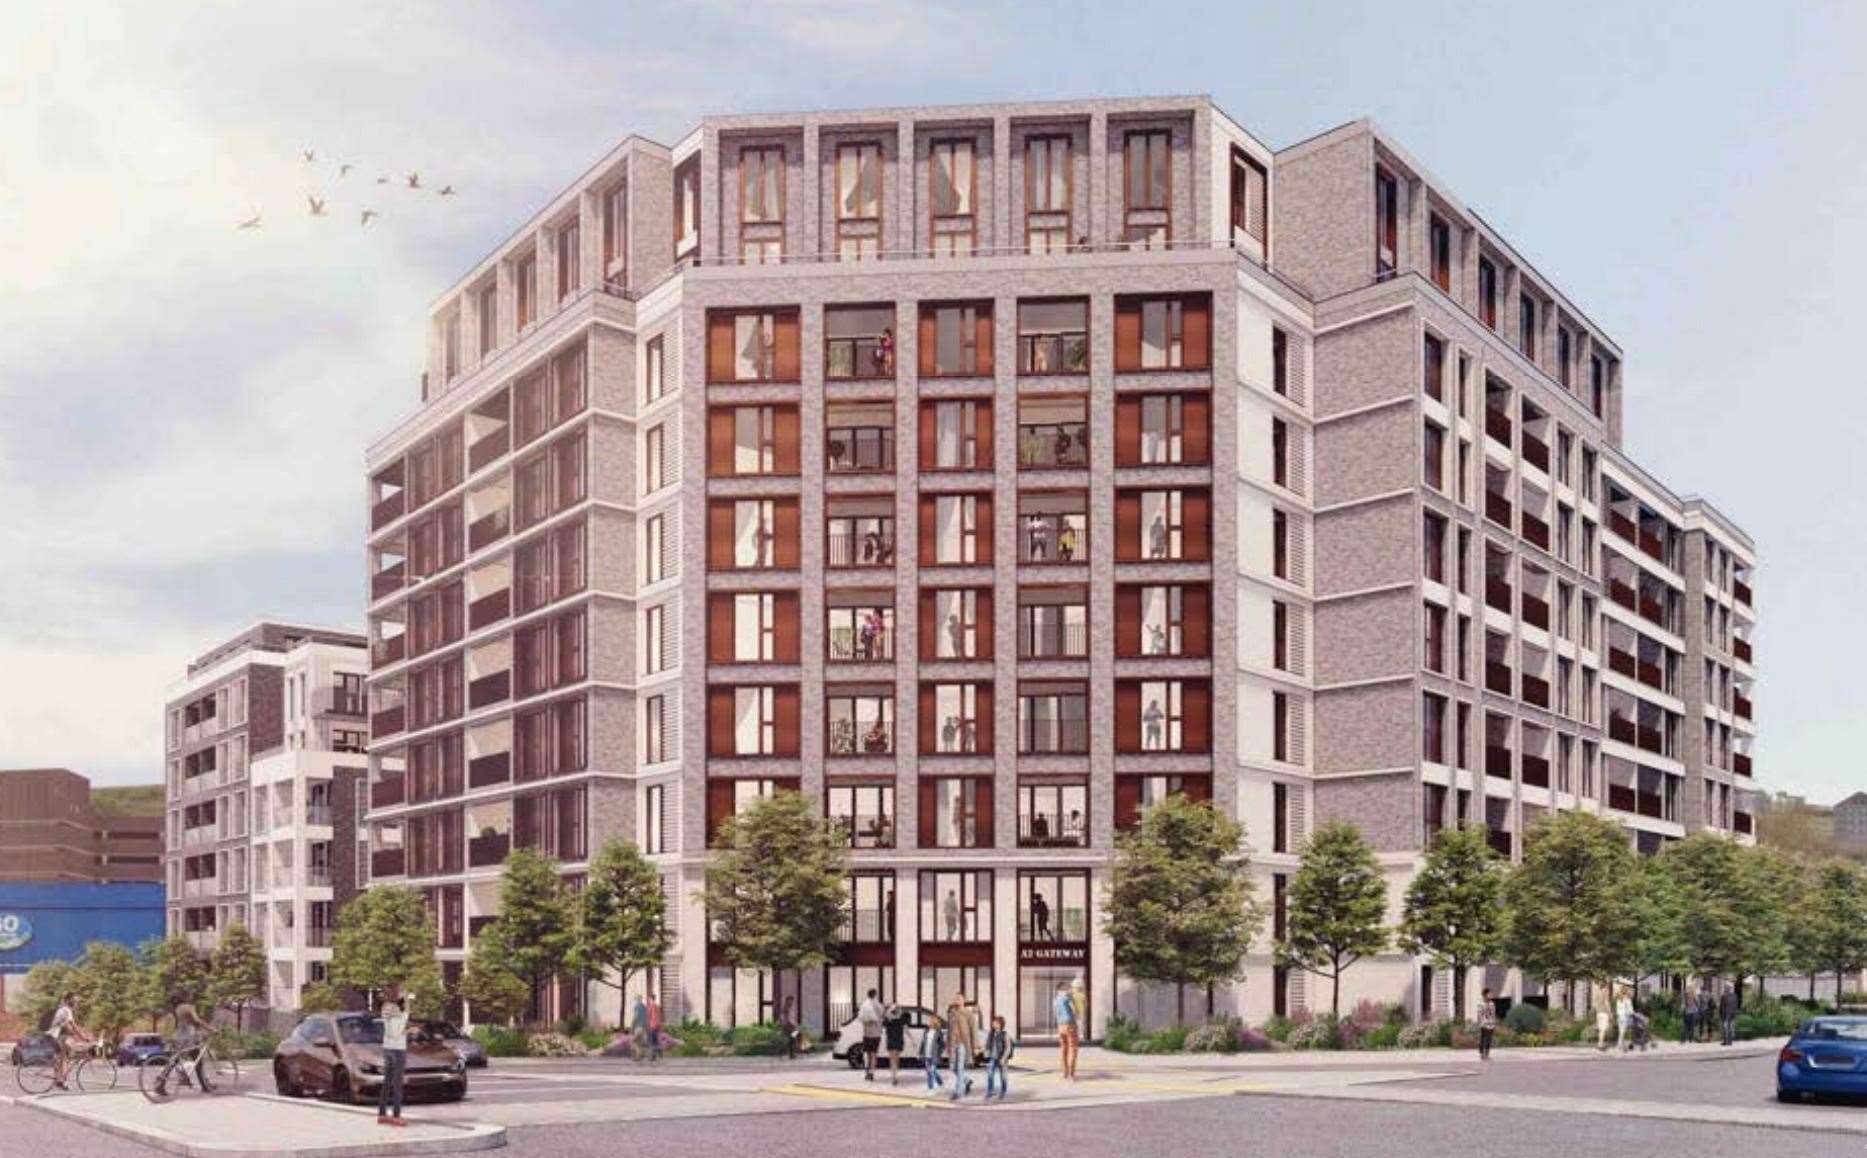 Donard Living has put forward plans for 231 flats within the old Buzz Bingo building, Chatham High Street. Picture: POD Architects Ltd